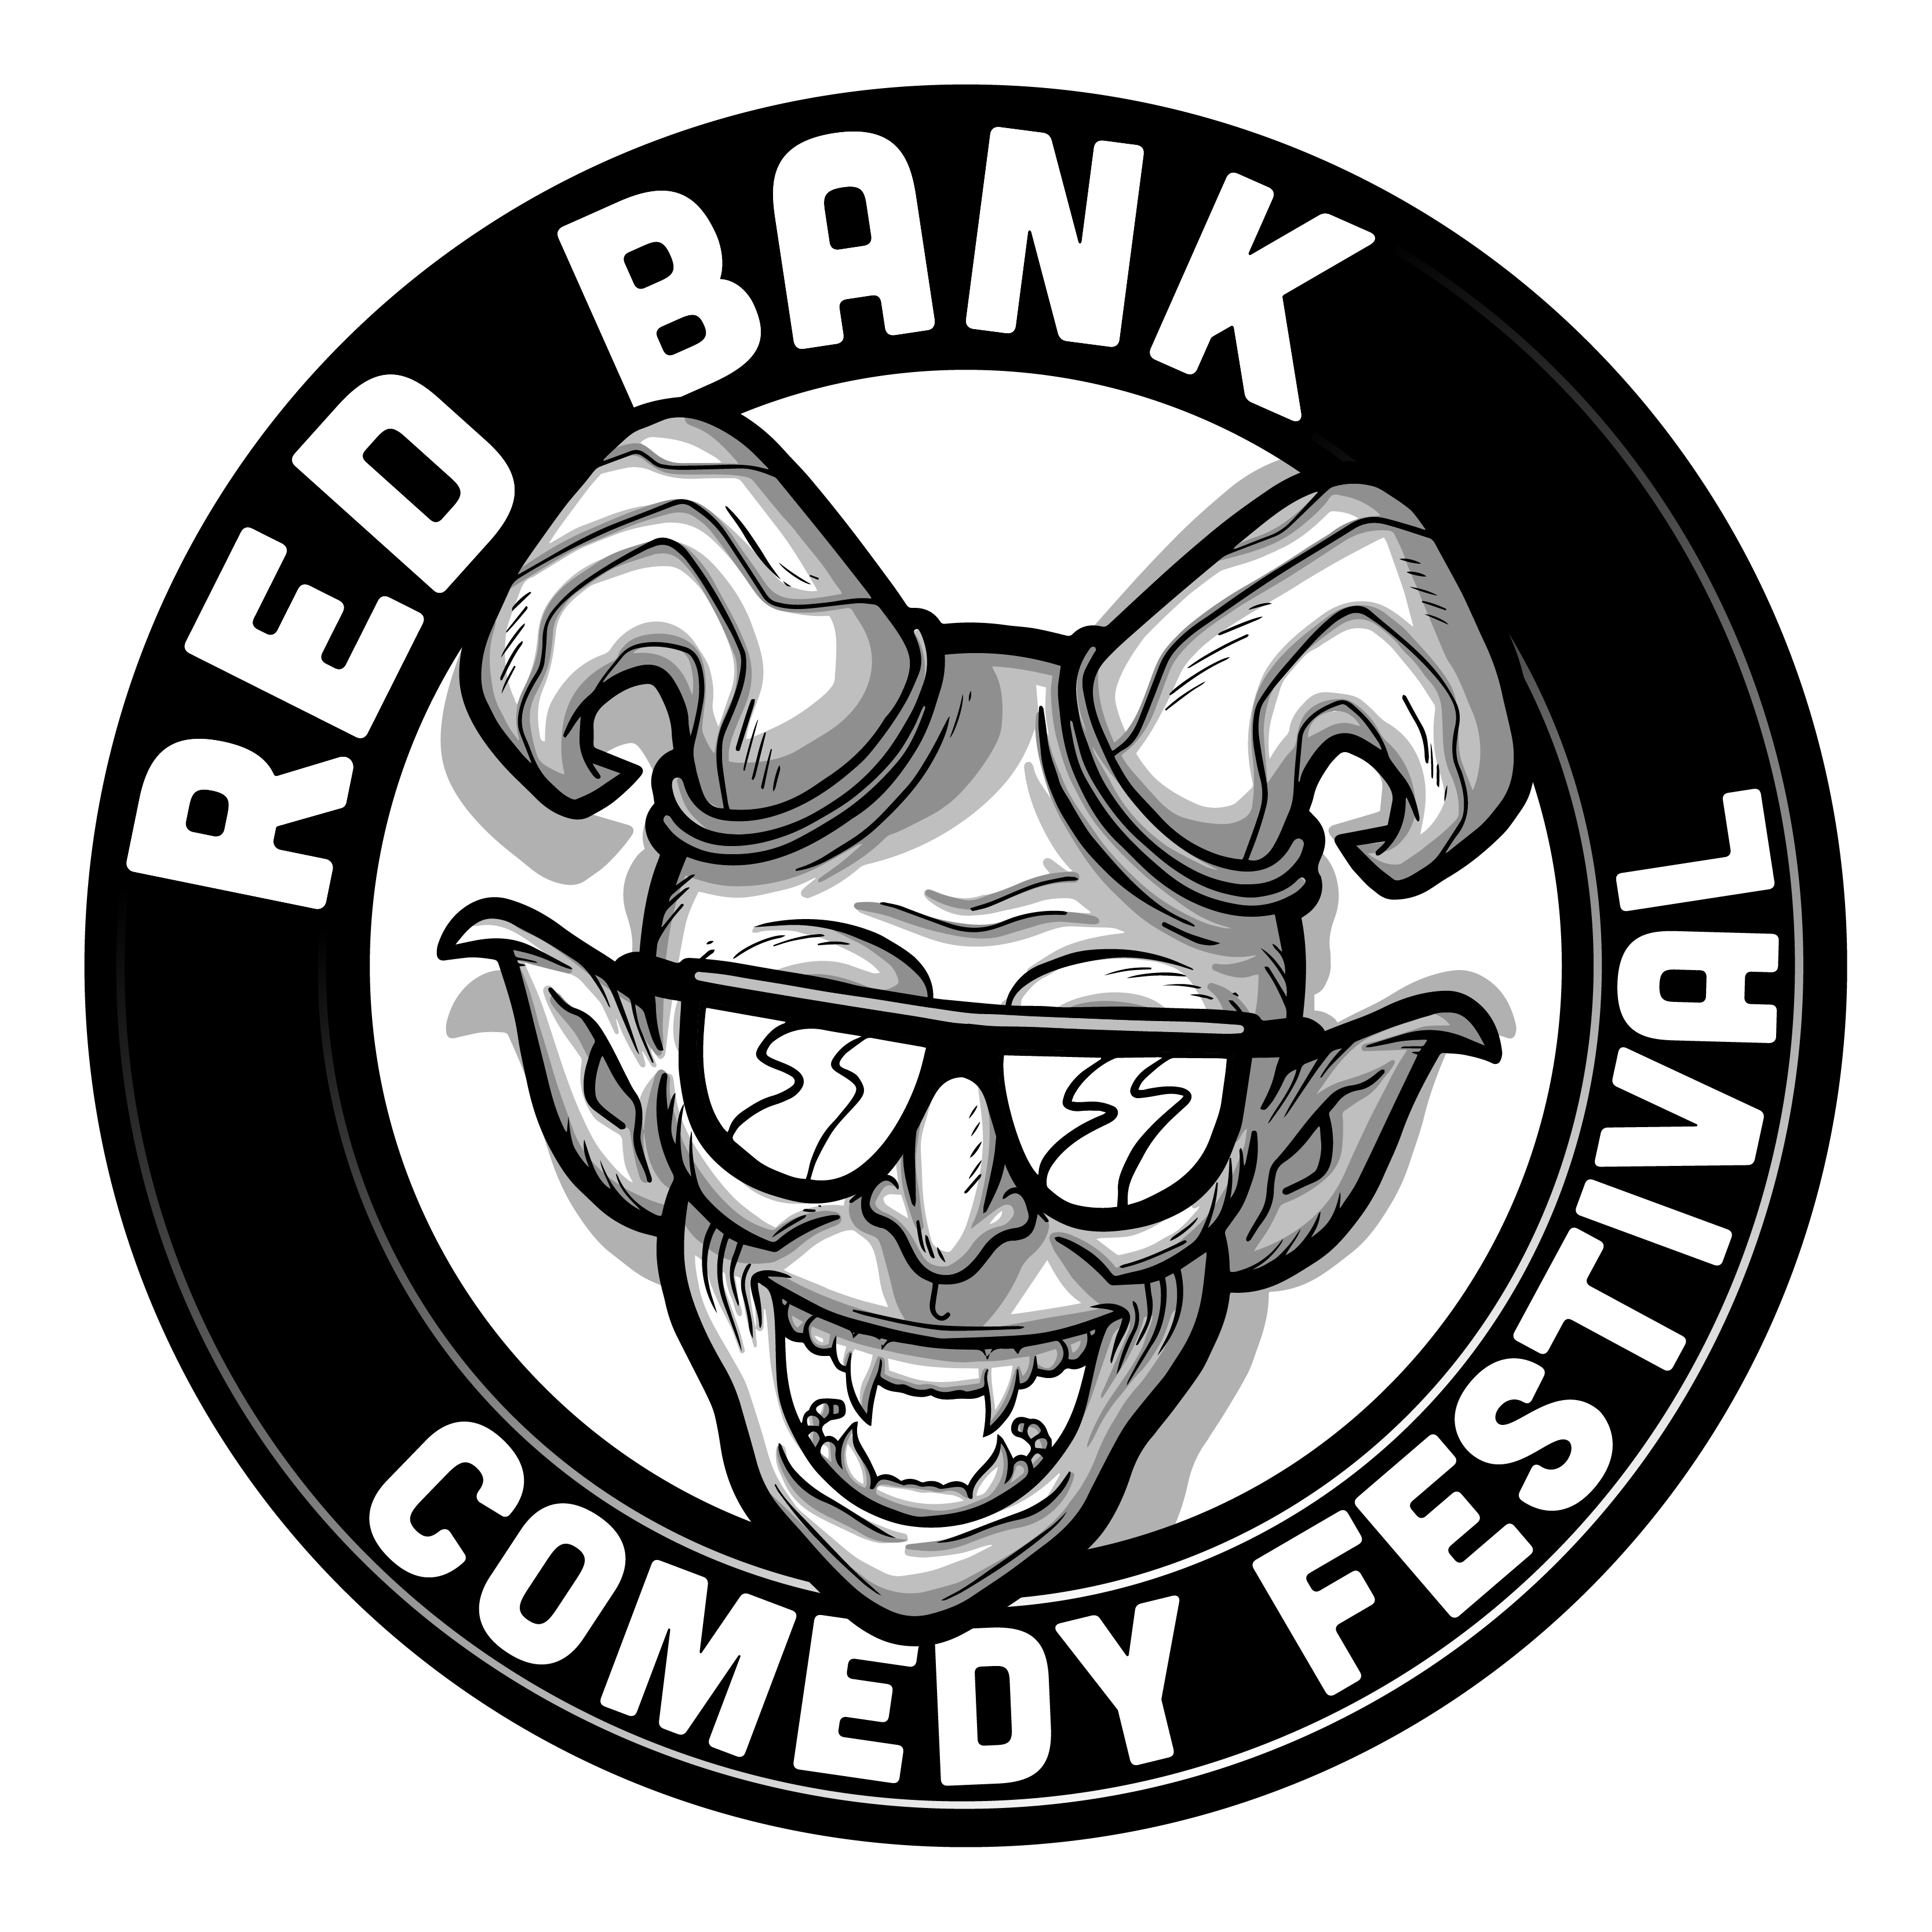 Red Bank Comedy Festival